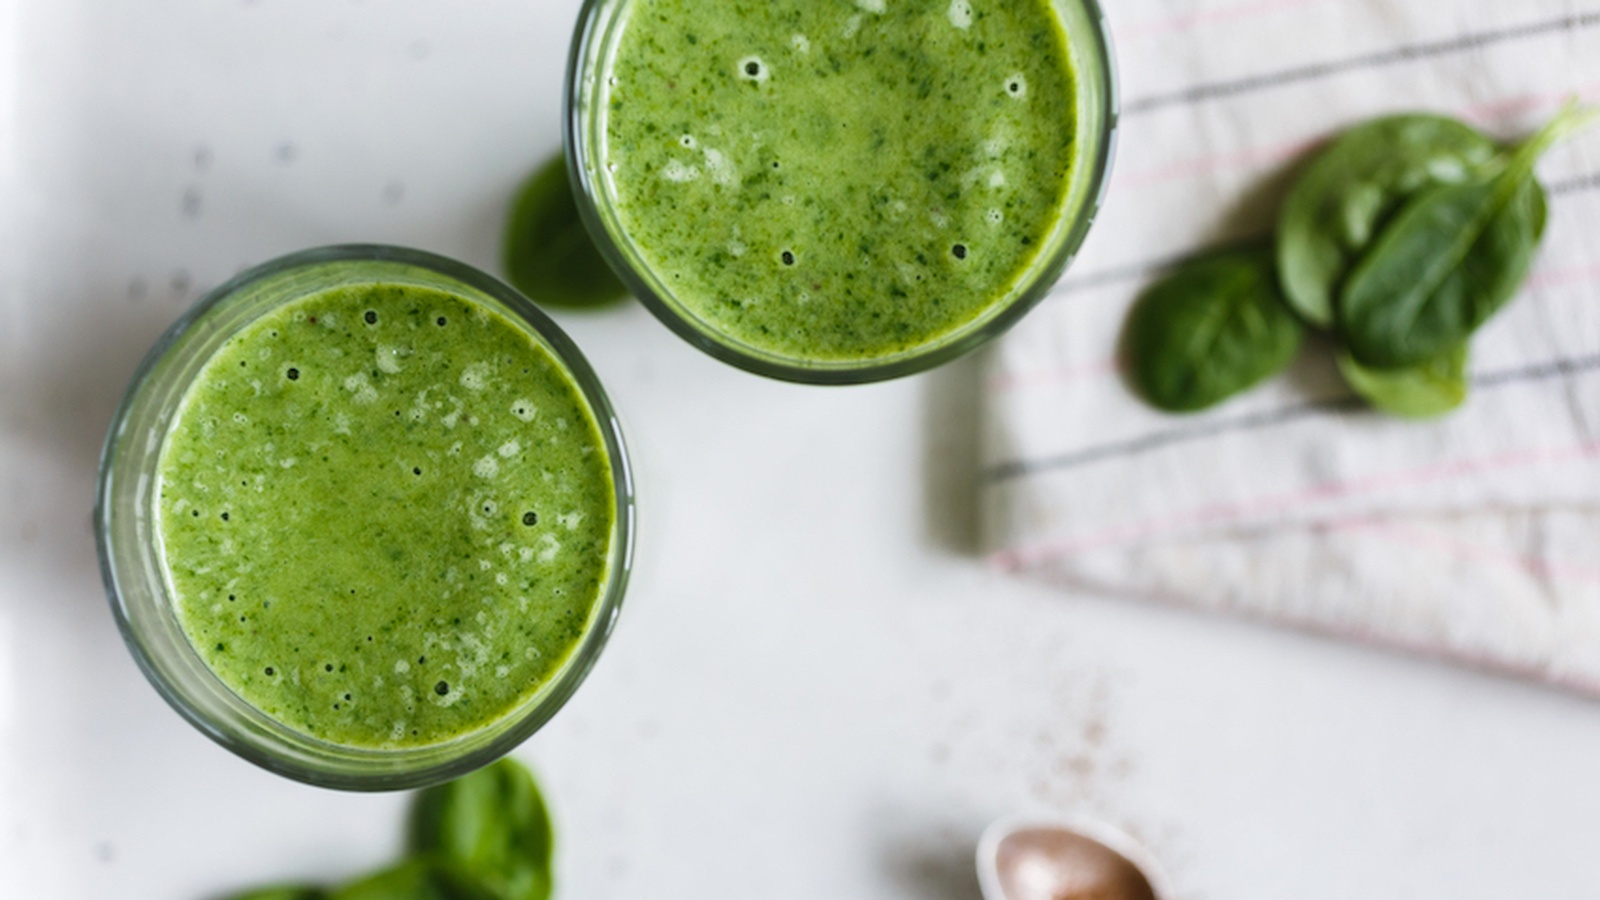 Juicing vs. Blending: Which One Is Better? | FOOD MATTERS®